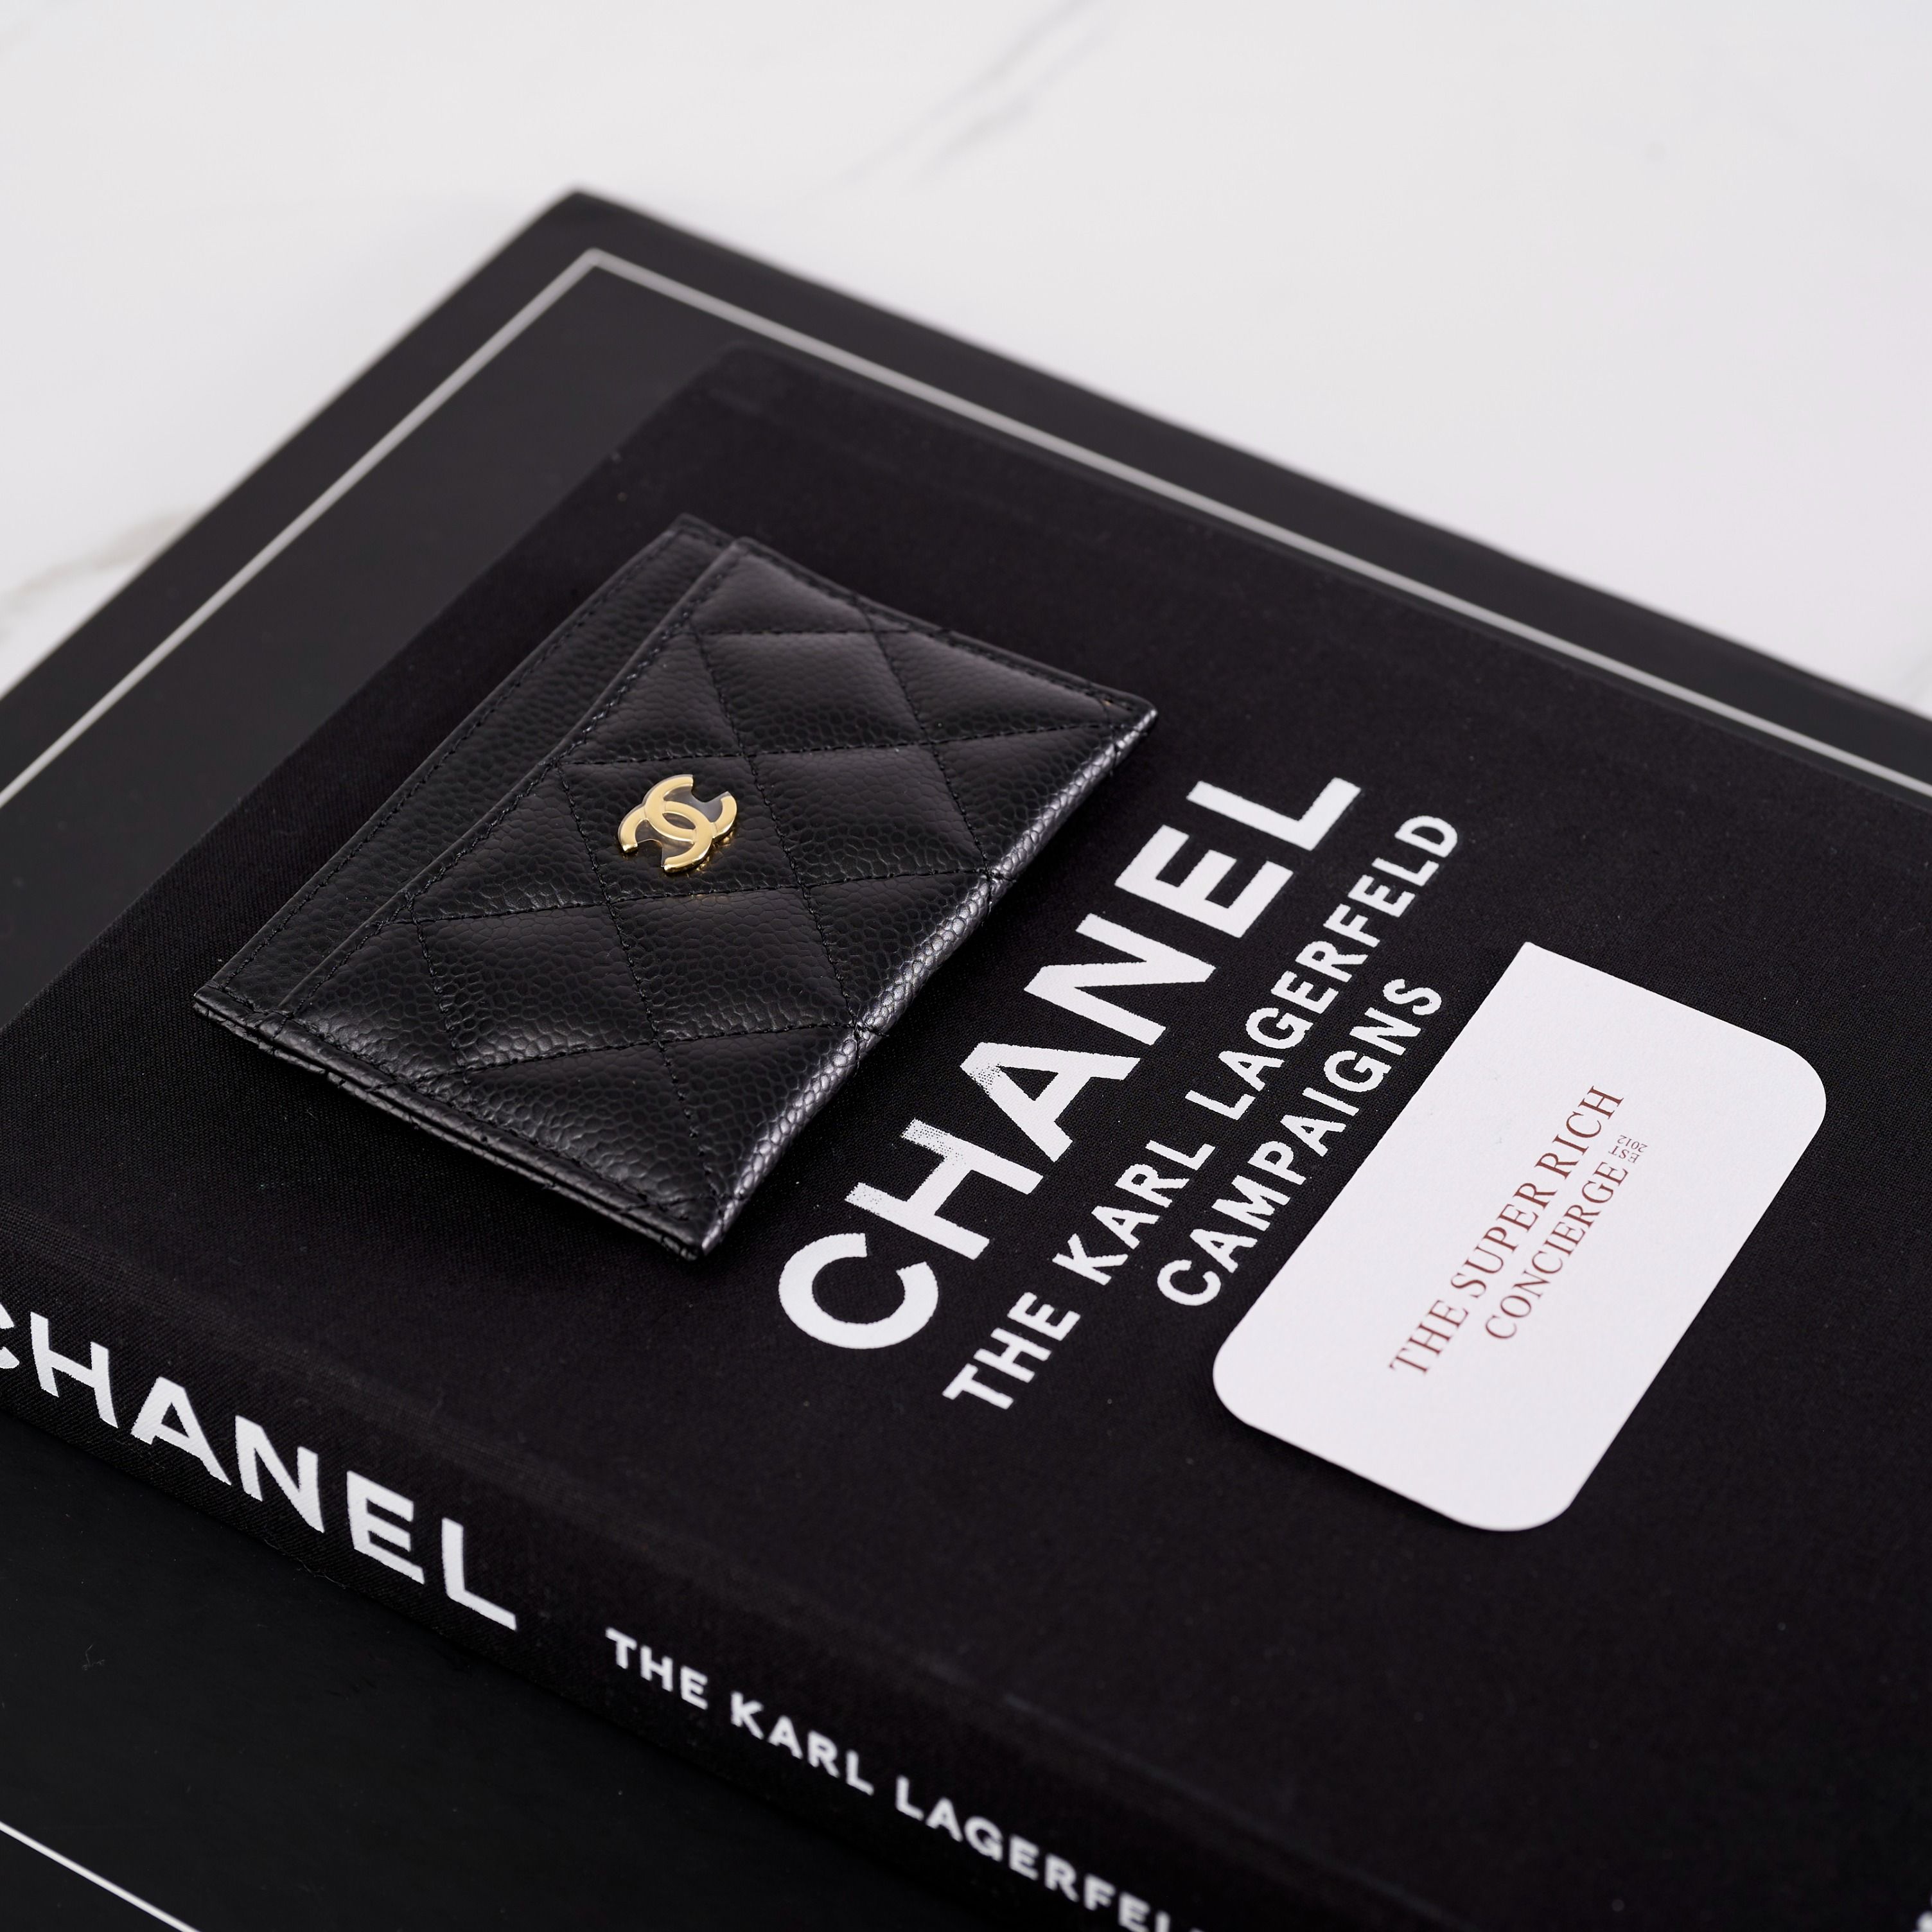 NEW] Chanel Classic Card Holder • Grained Calfskin & Gold-Tone